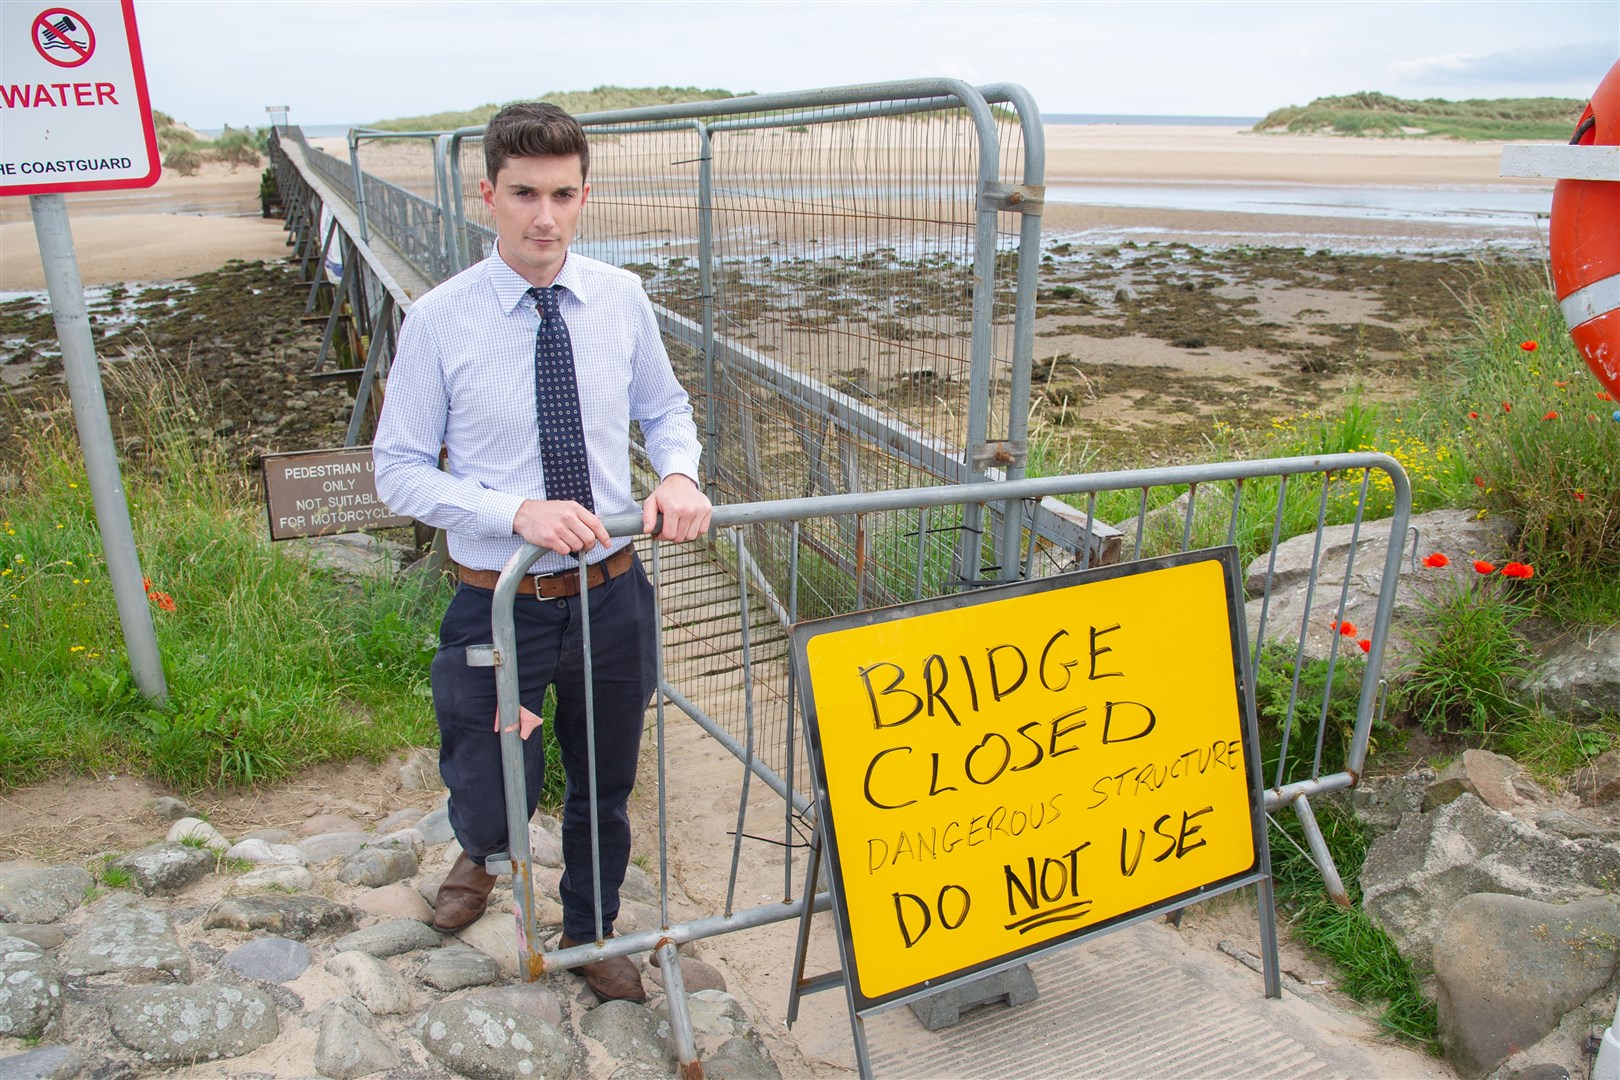 Huw Williams, Development Officer of the Lossiemouth Community Trust, at the Lossiemouth East Beach footbridge which has been closed to the public due to safety concerns...Picture: Daniel Forsyth. Image No.044511.